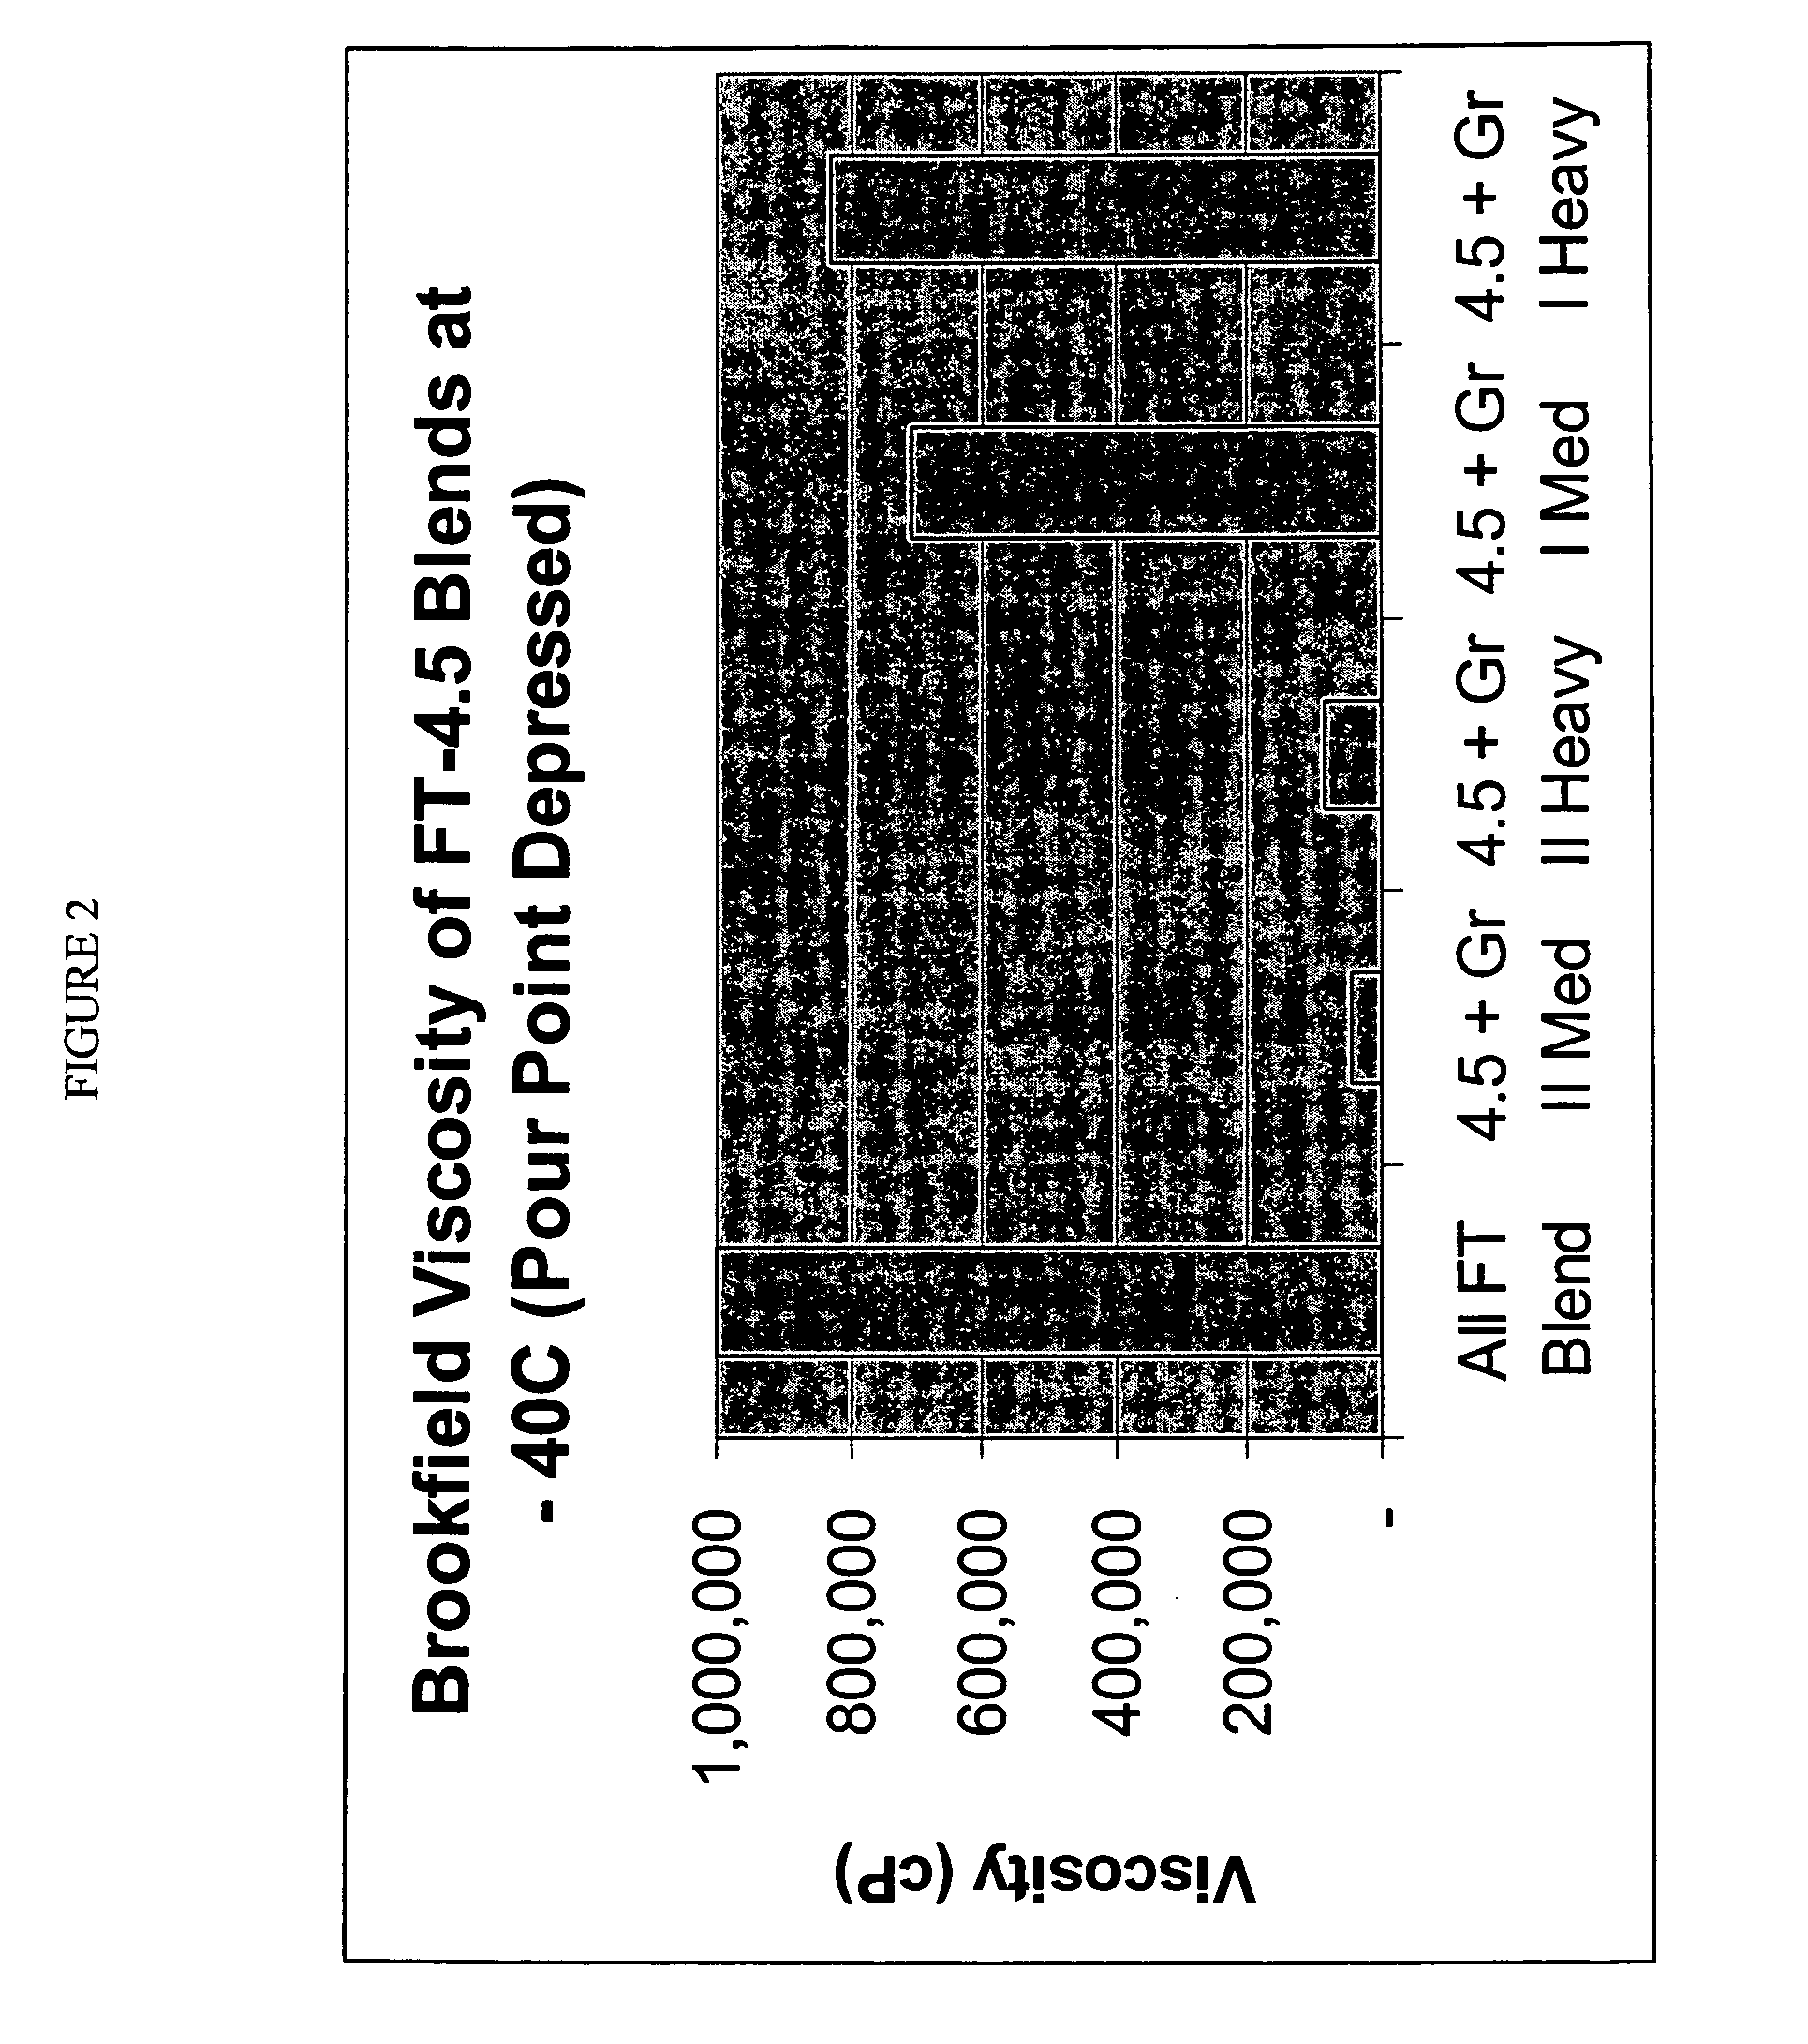 Processes for making lubricant blends with low brookfield viscosities